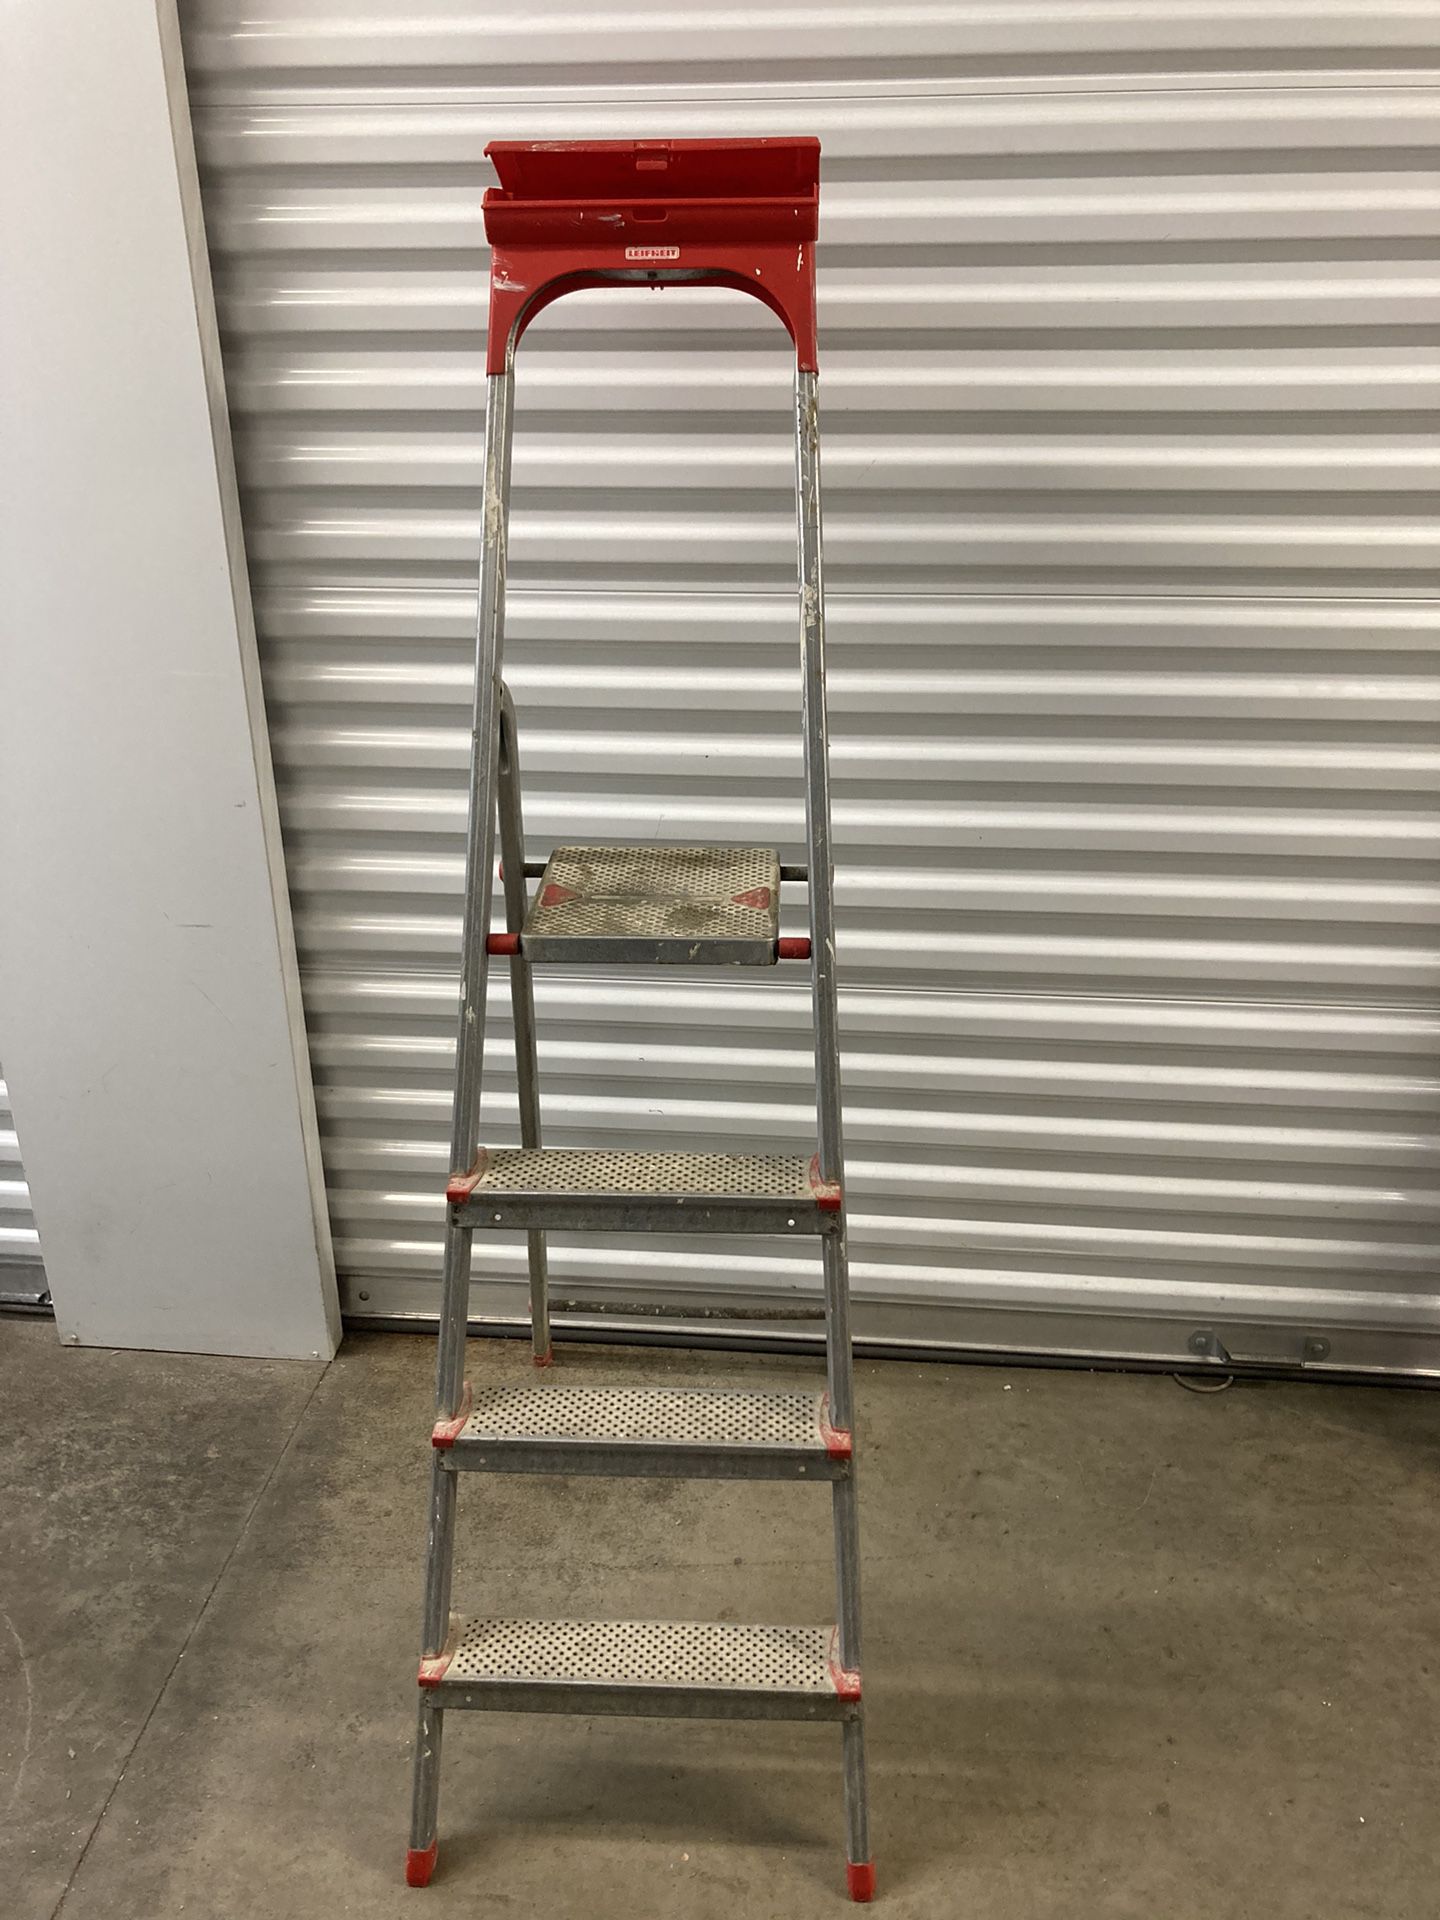 Ladder 5’ Aluminum With Compartment At Top.  Lightweight Folding Step Ladder 